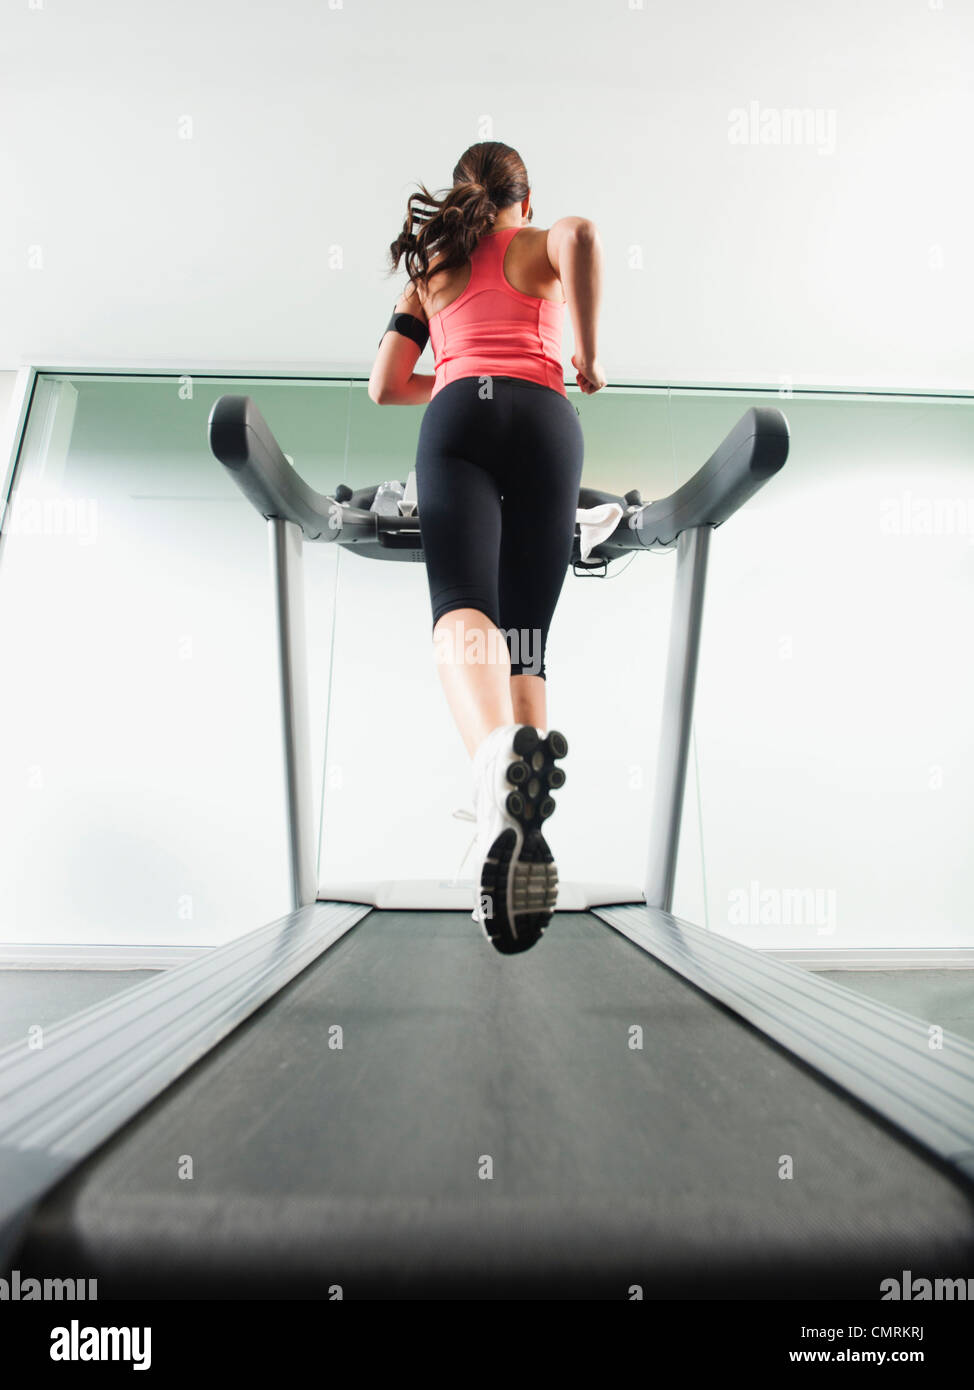 Mixed Race woman running on treadmill Banque D'Images